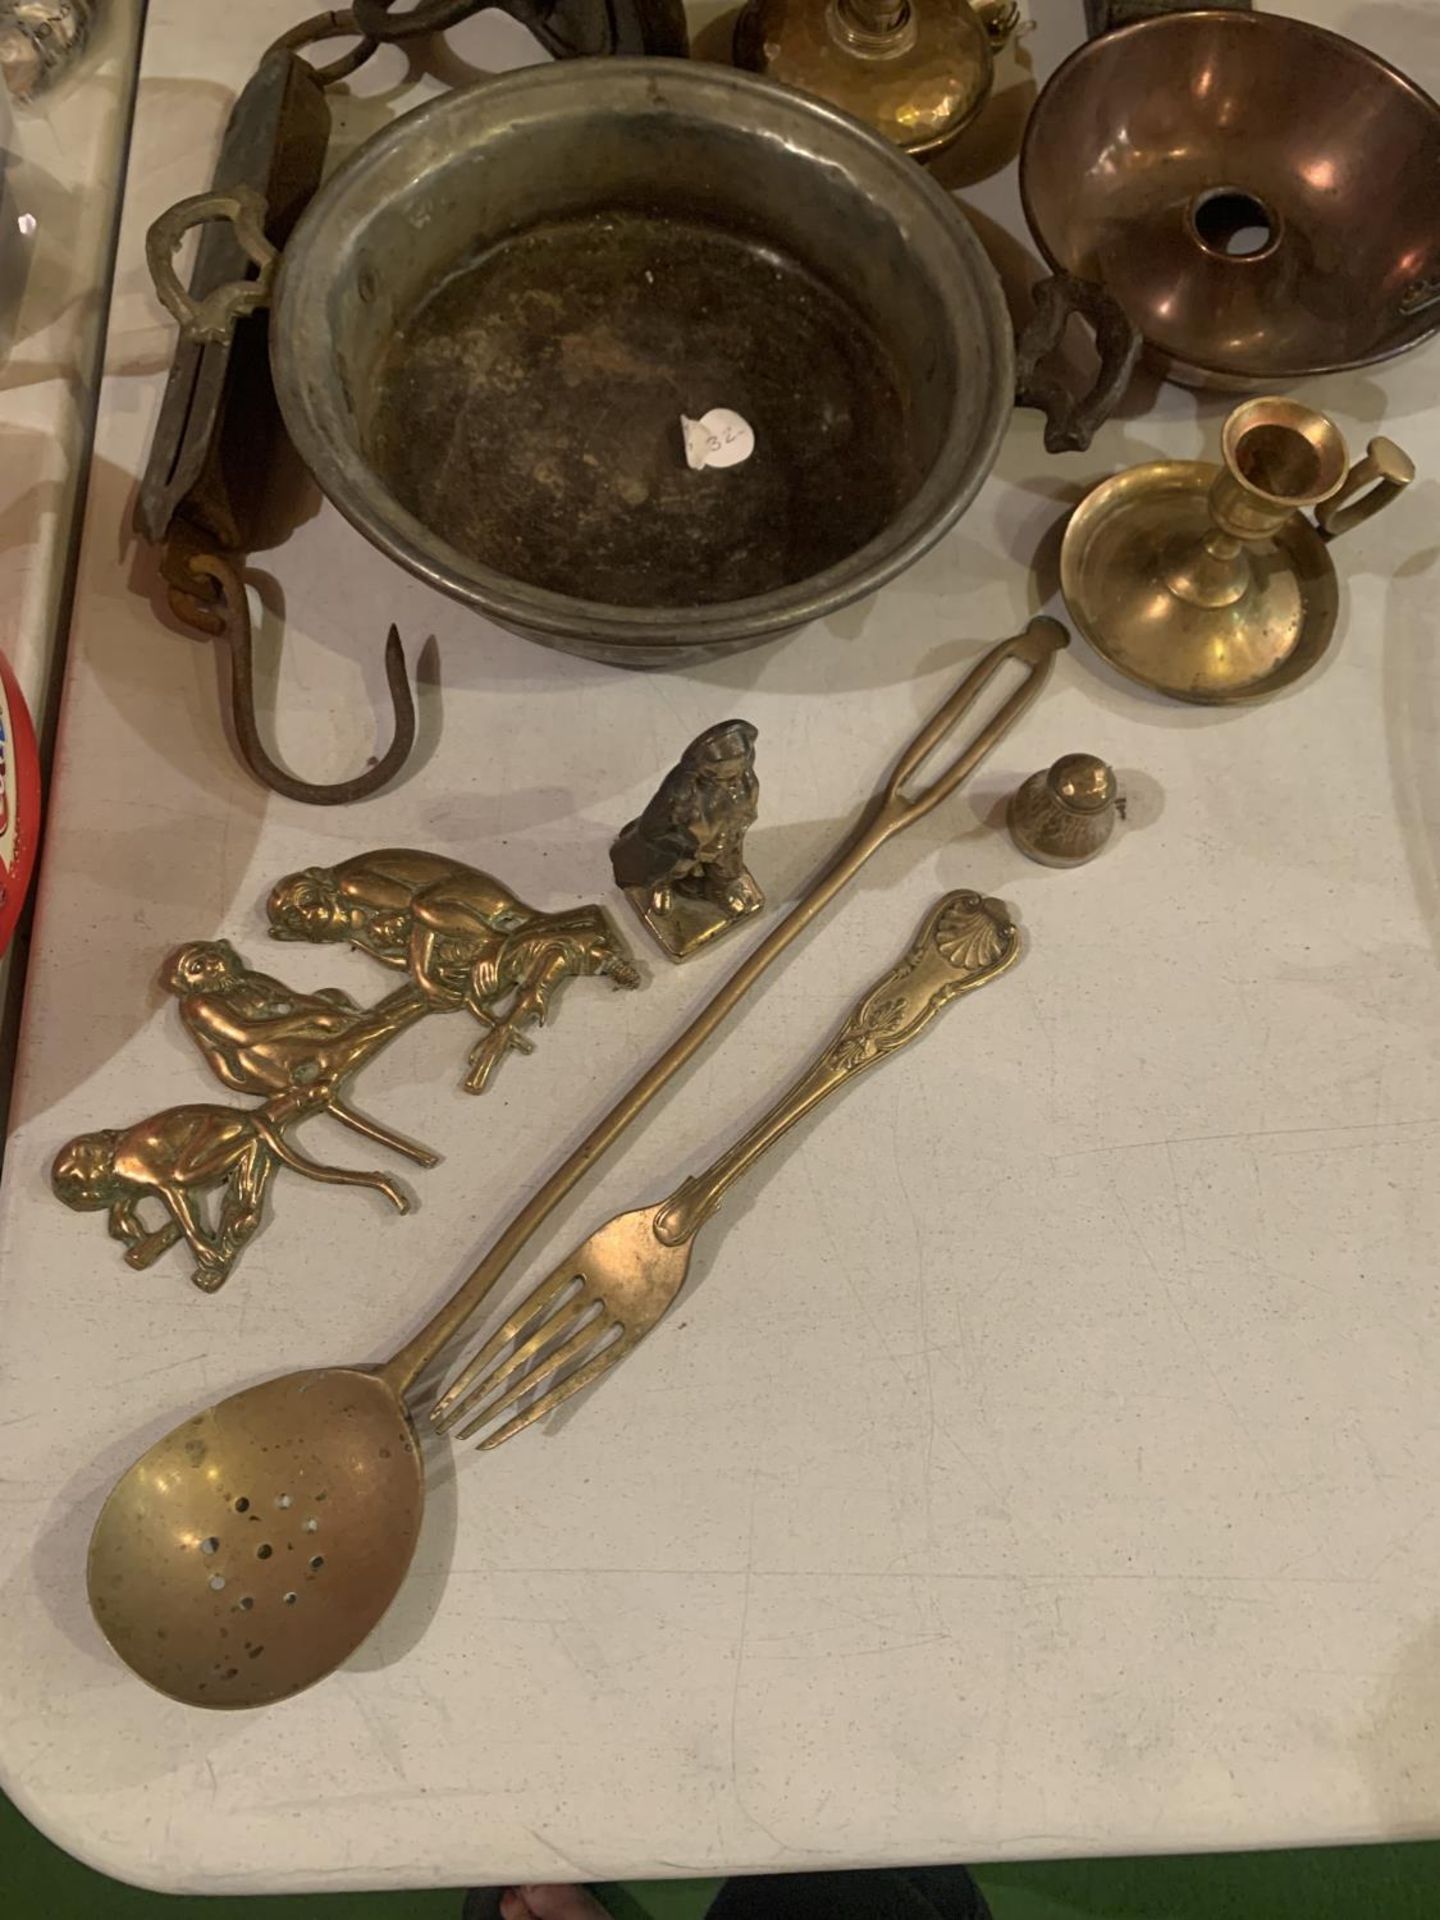 A QUANTITY OF BRASS AND COPPER WARE TO INCLUDE A HANDLED BOWL, CANDLE HOLDER, TRINKETS ETC. - Image 2 of 3